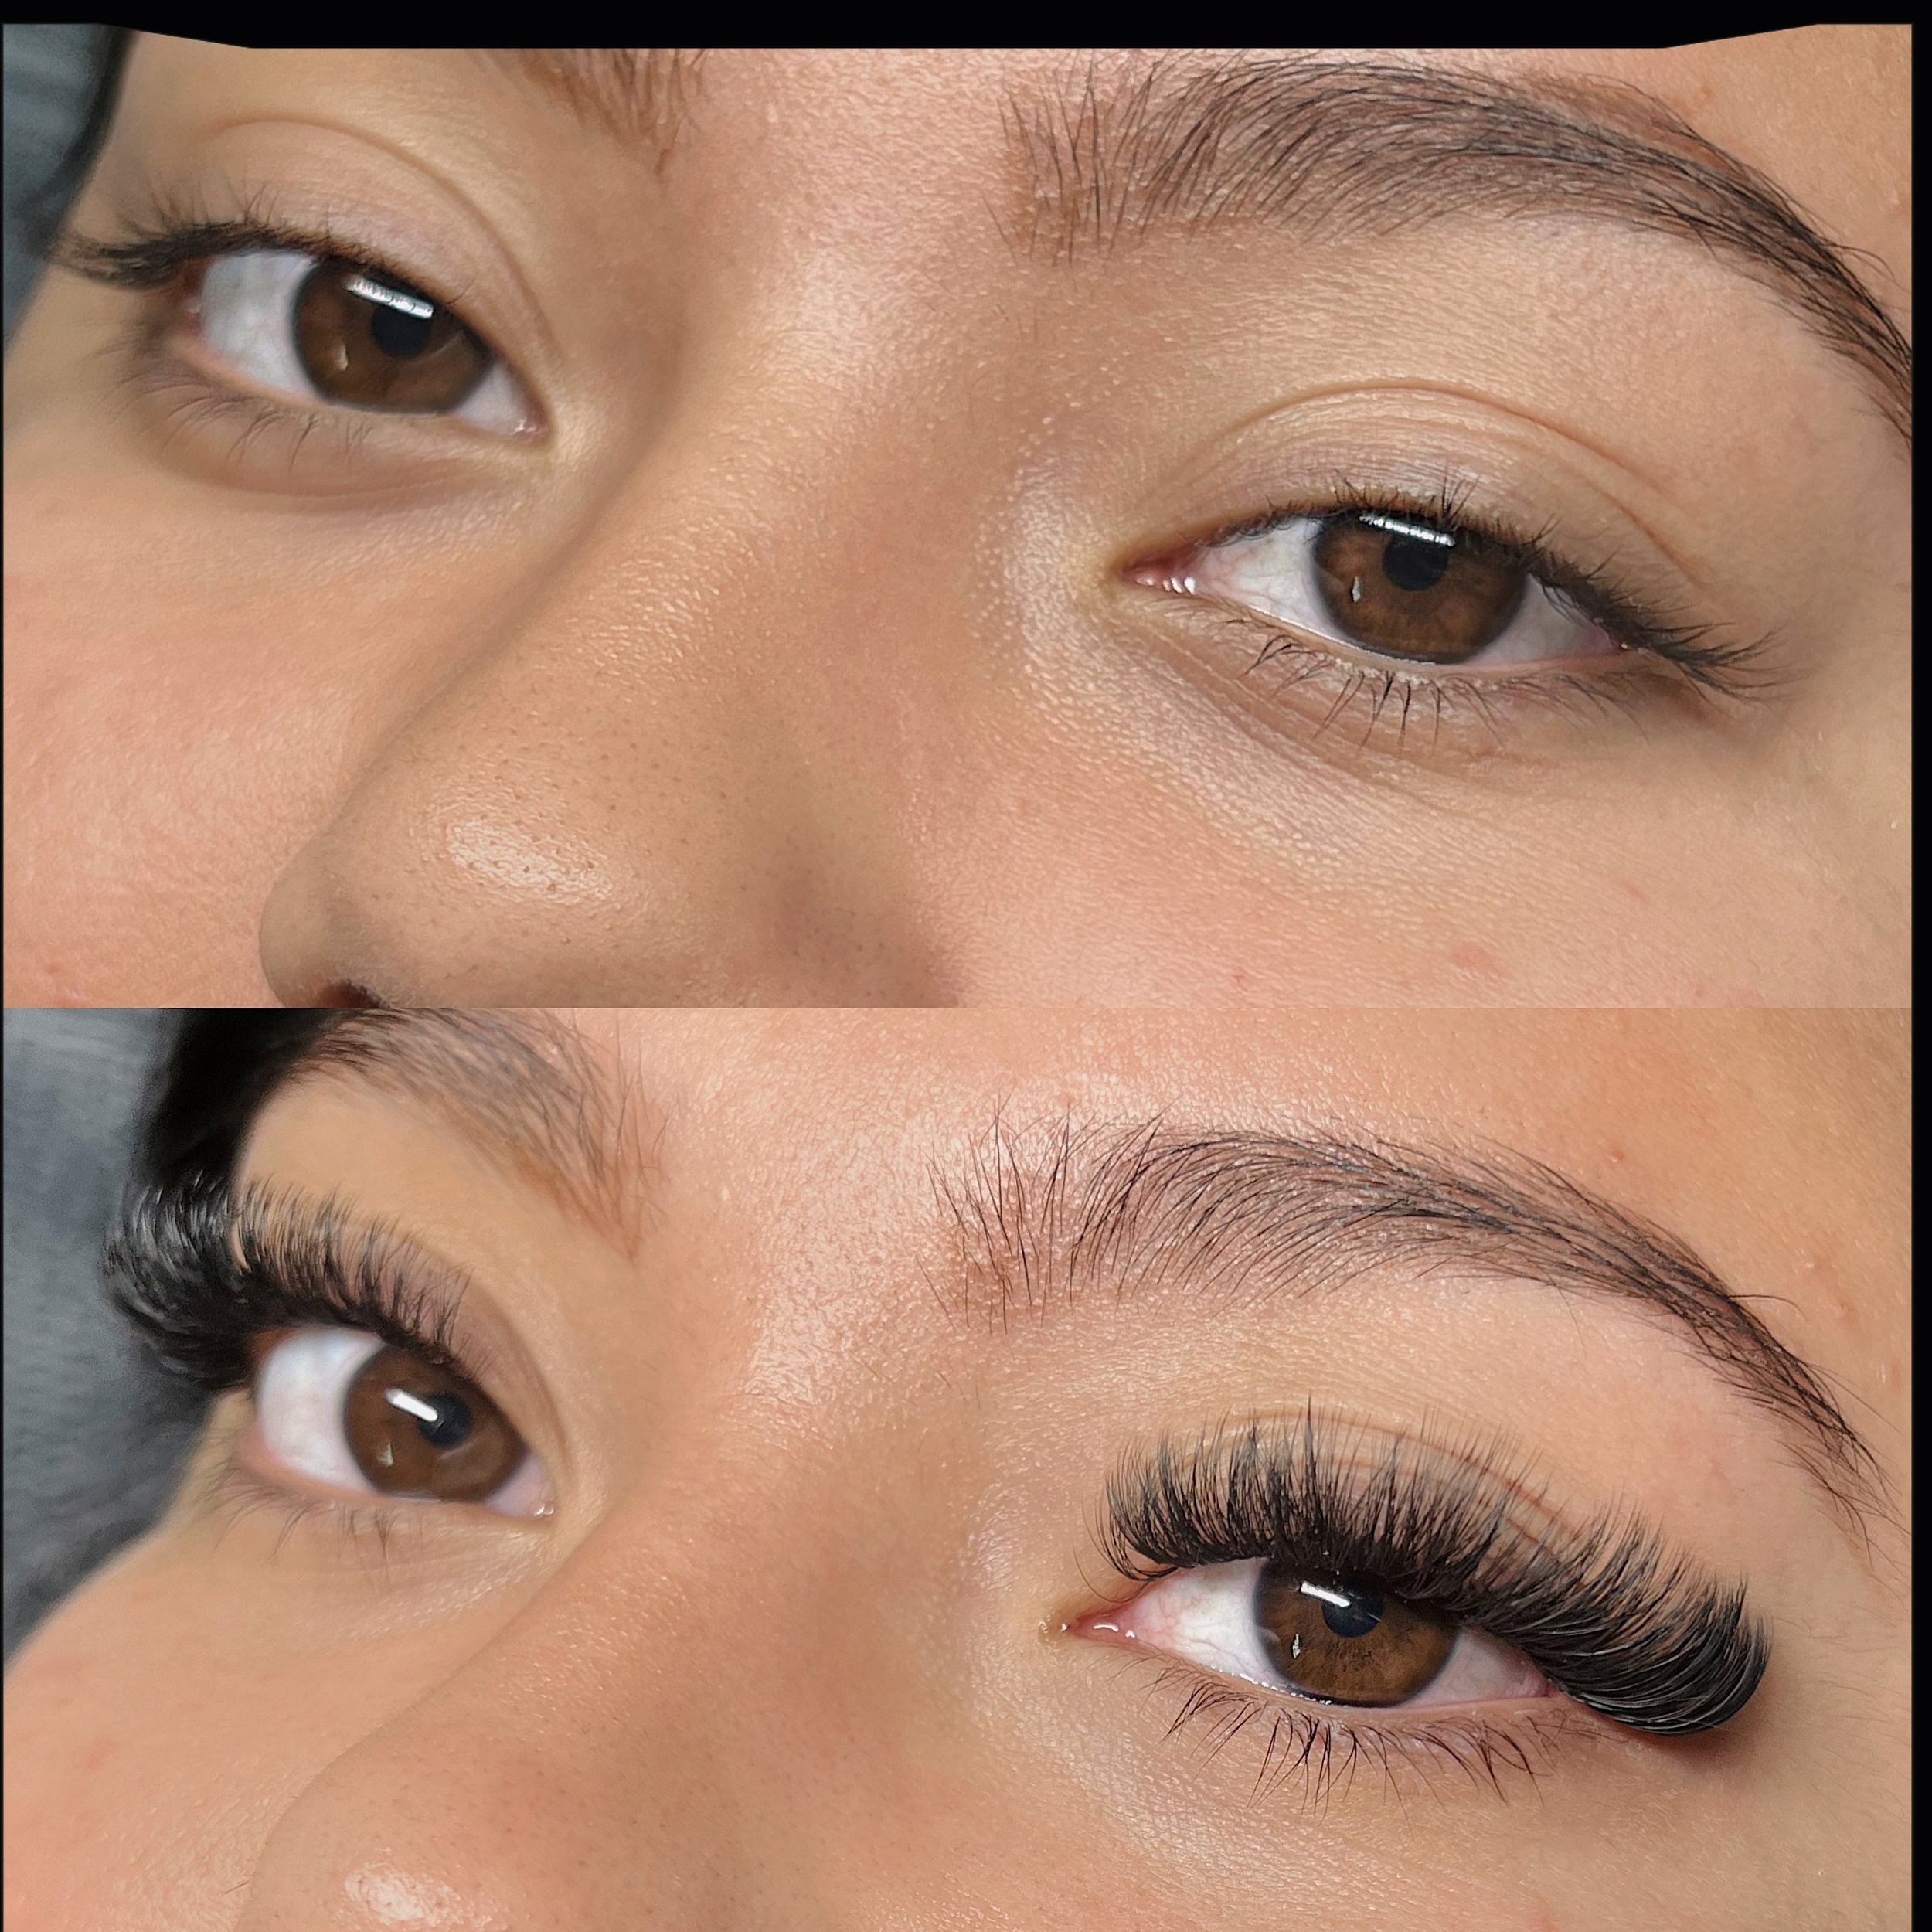 The beautiful lash transformation from this morning! 
This set is making me want to get my own lash extensions back!! 😍😍

May &amp; June booking is open and available to schedule your lash appointments! Use link in my bio to book 🫶🏼

#tucsonlashe